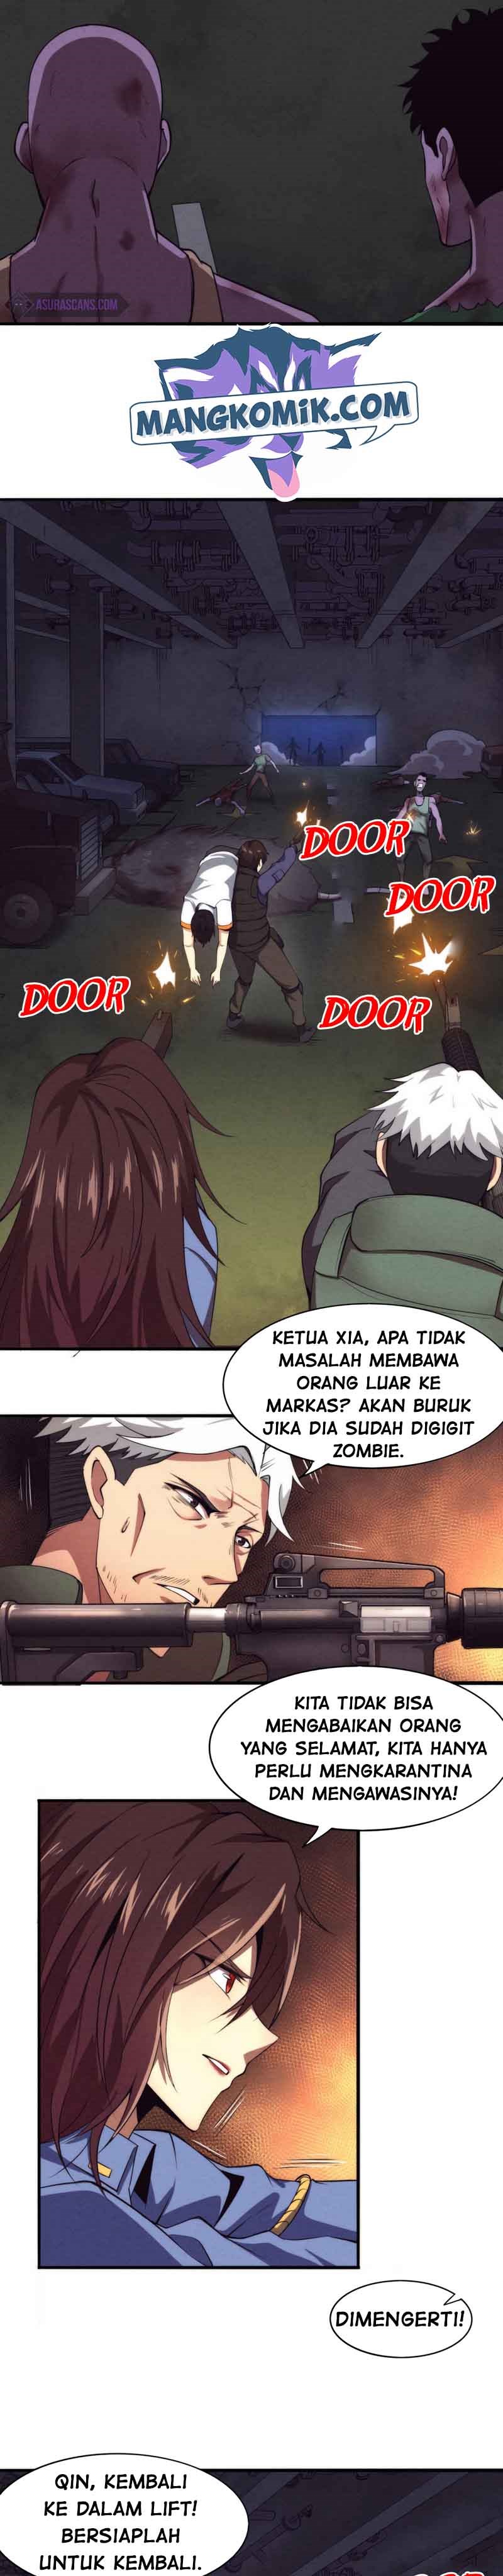 Evolution frenzy Chapter 12 bahasa indoensia